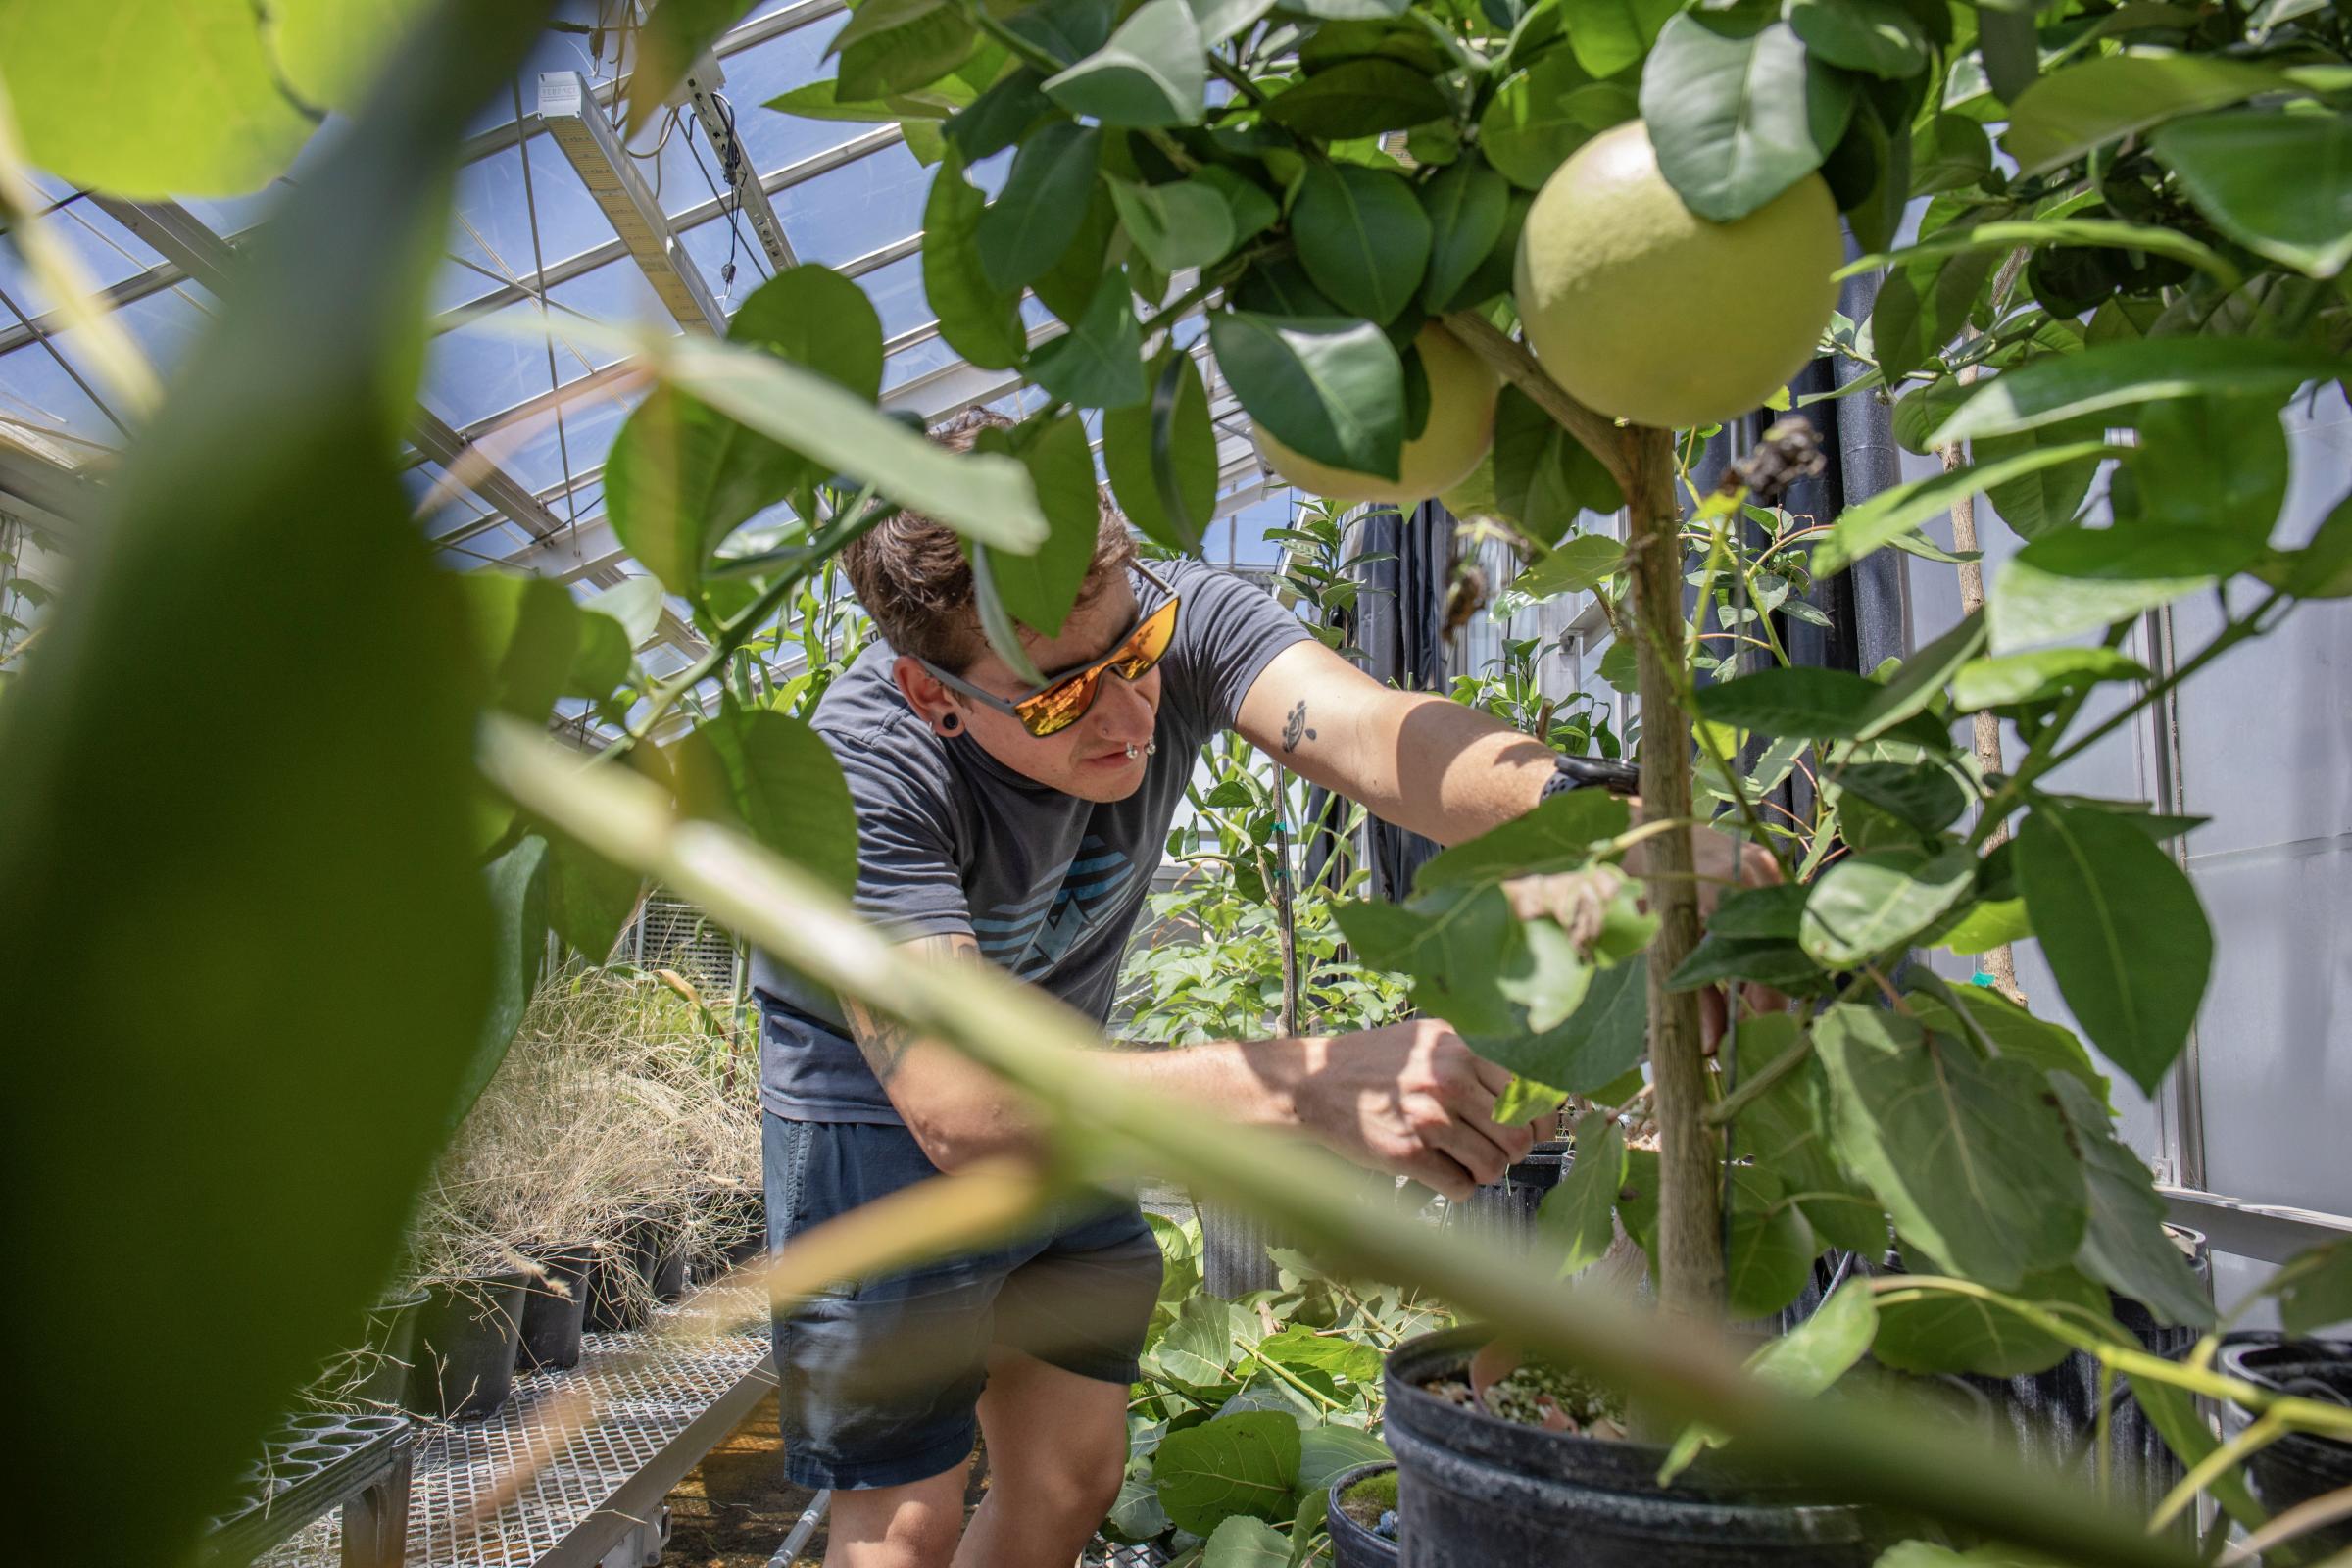 Crisis on the Rio Grande - Wes Noe cuts back a lemon tree. (Photo by Diana Cervantes for Source NM)